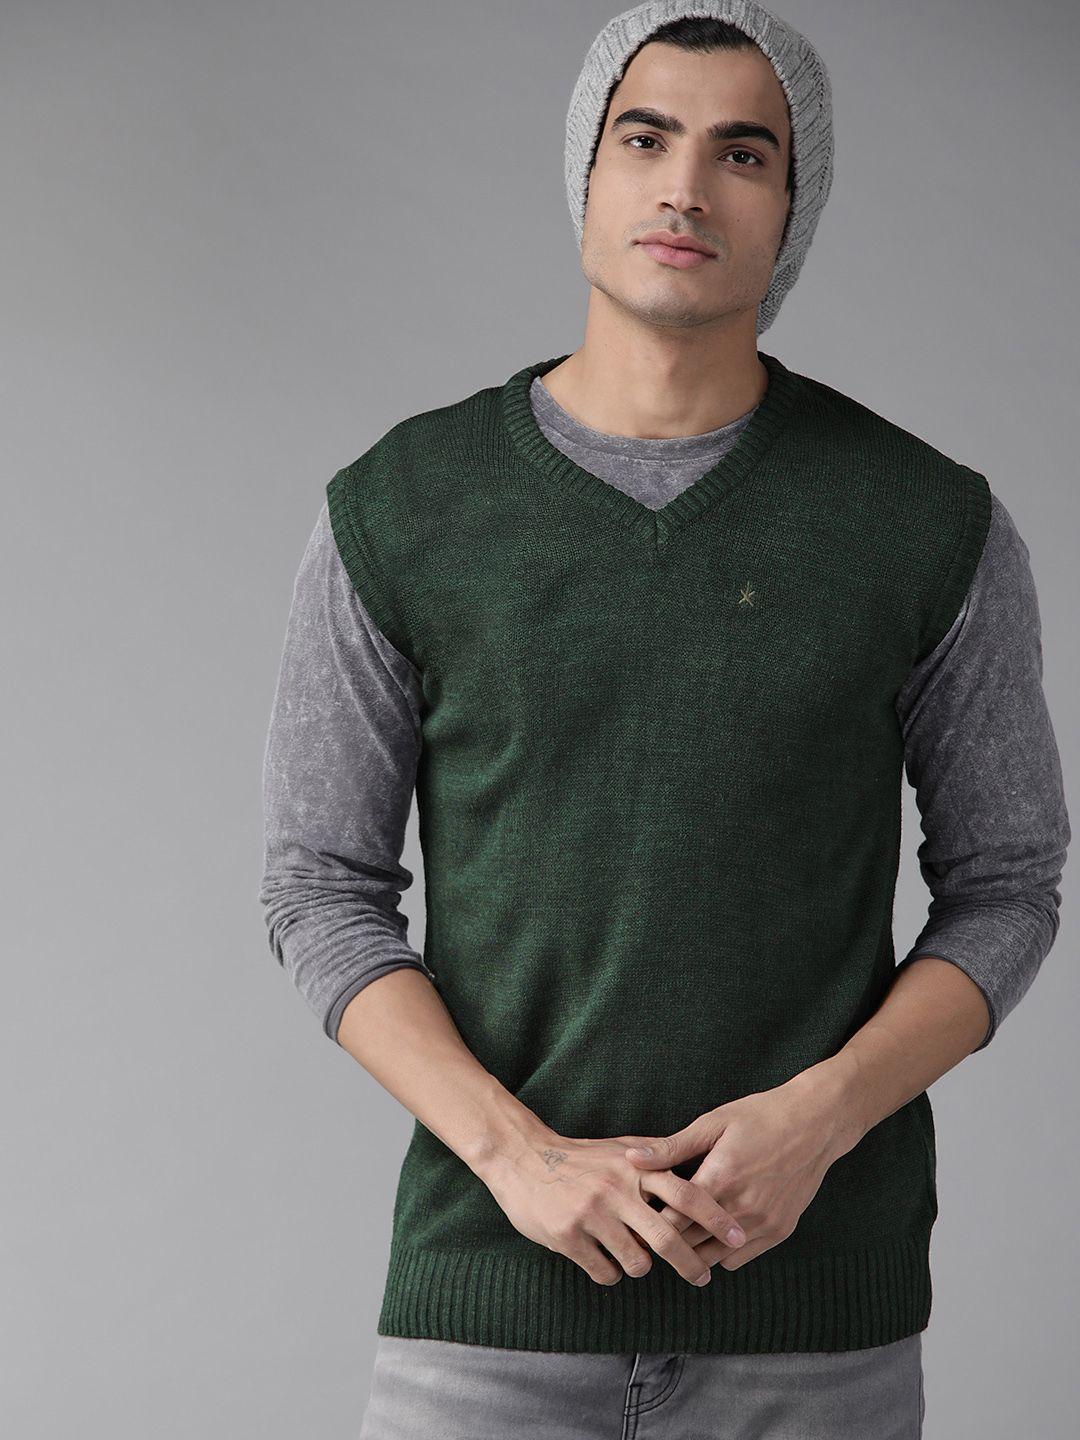 the roadster lifestyle co men green solid sweater vest